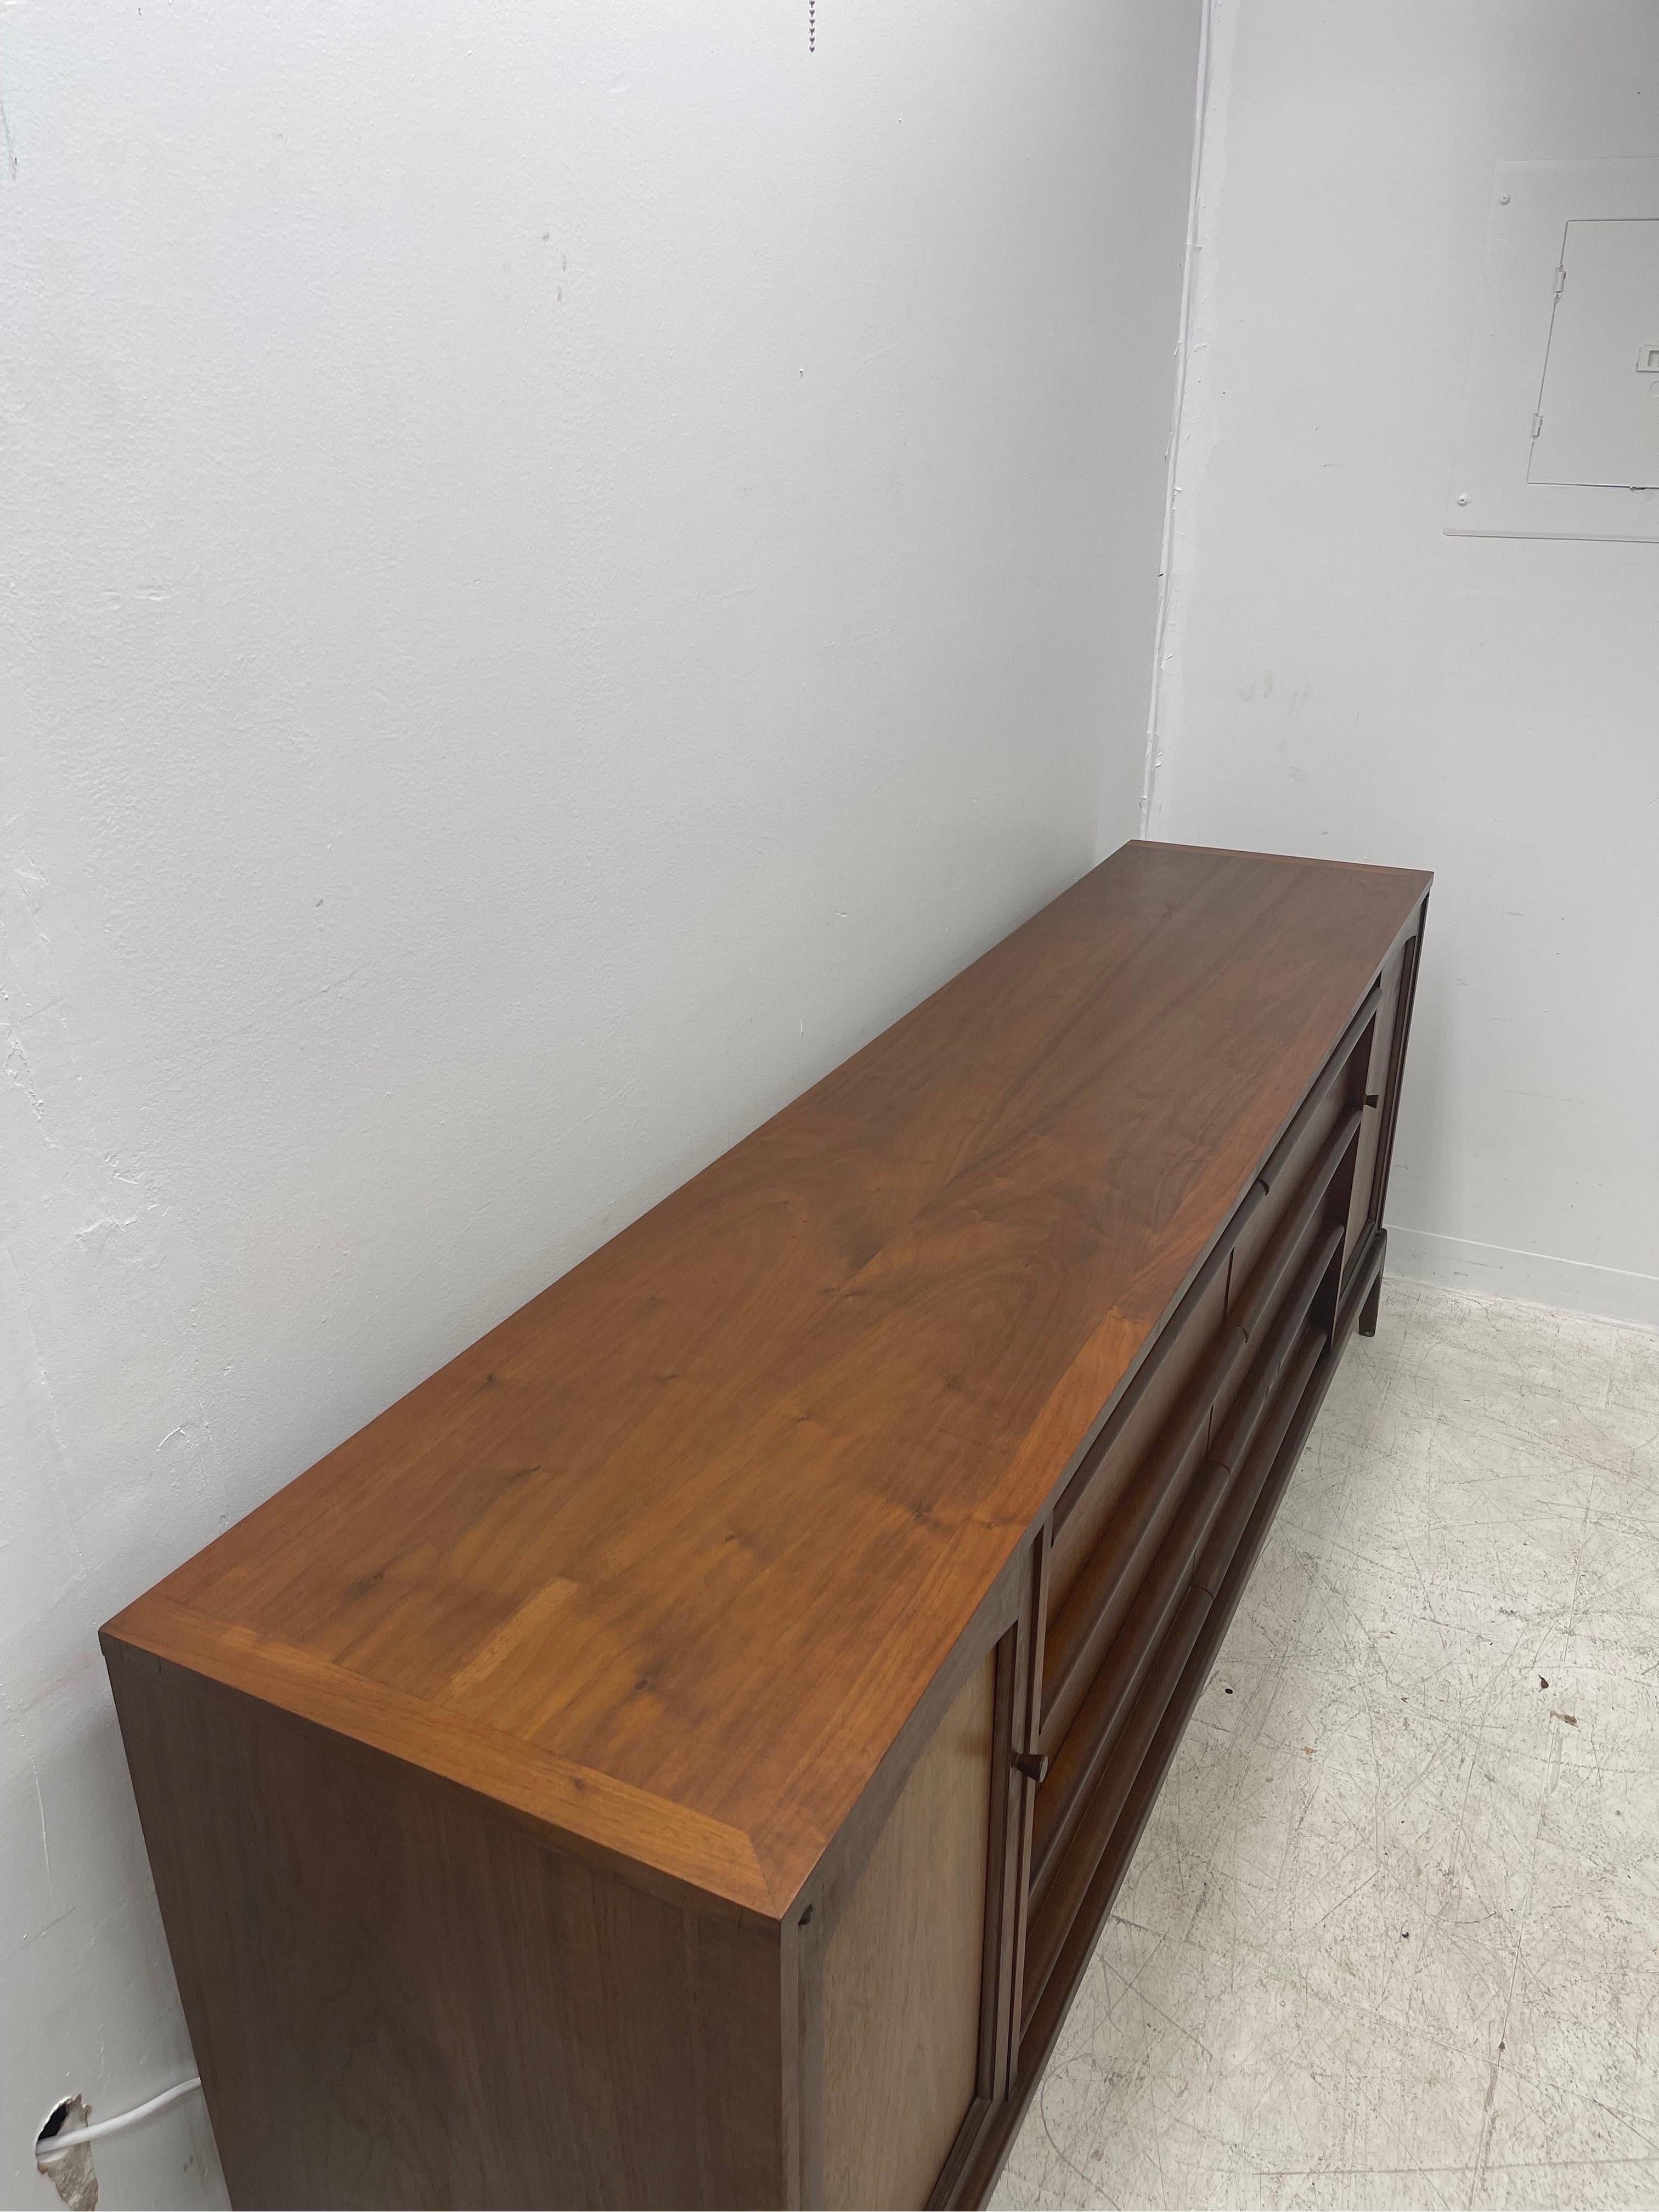 Vintage Mid-Century Modern Credenza Cabinet Dovetail Drawers For Sale 2